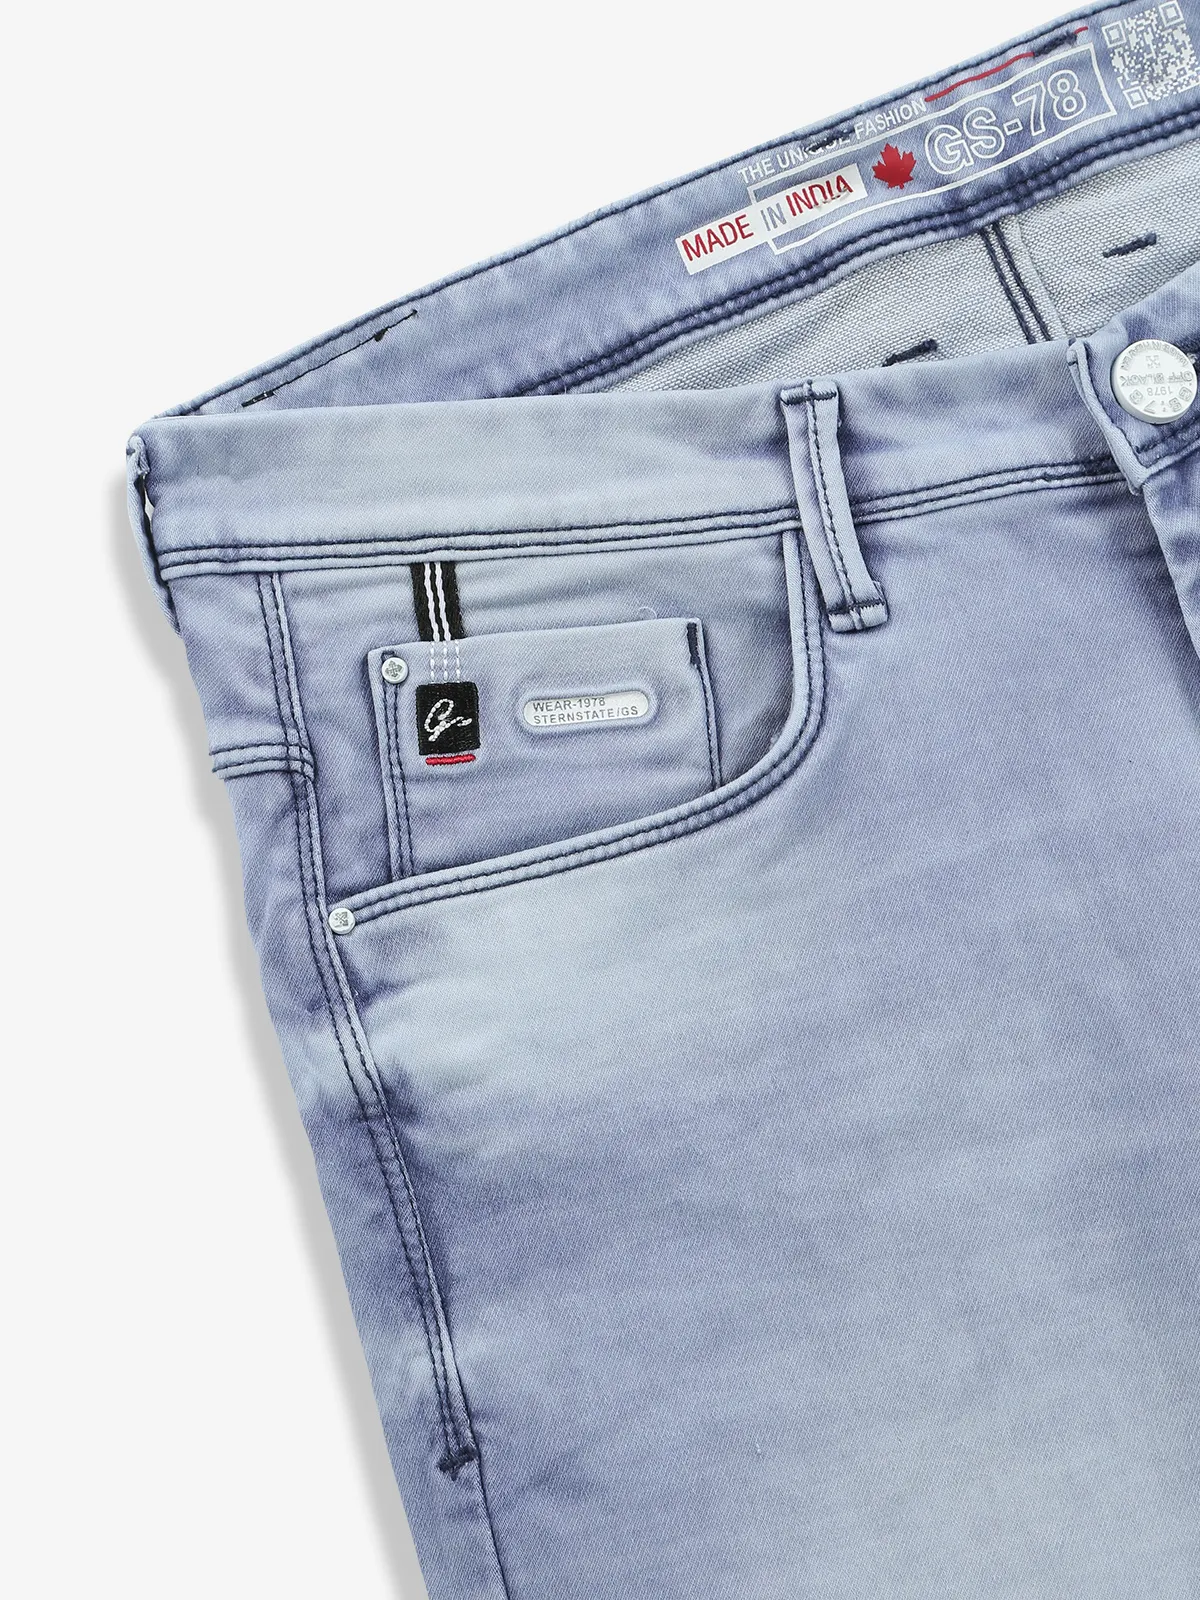 GS78 washed light blue jeans